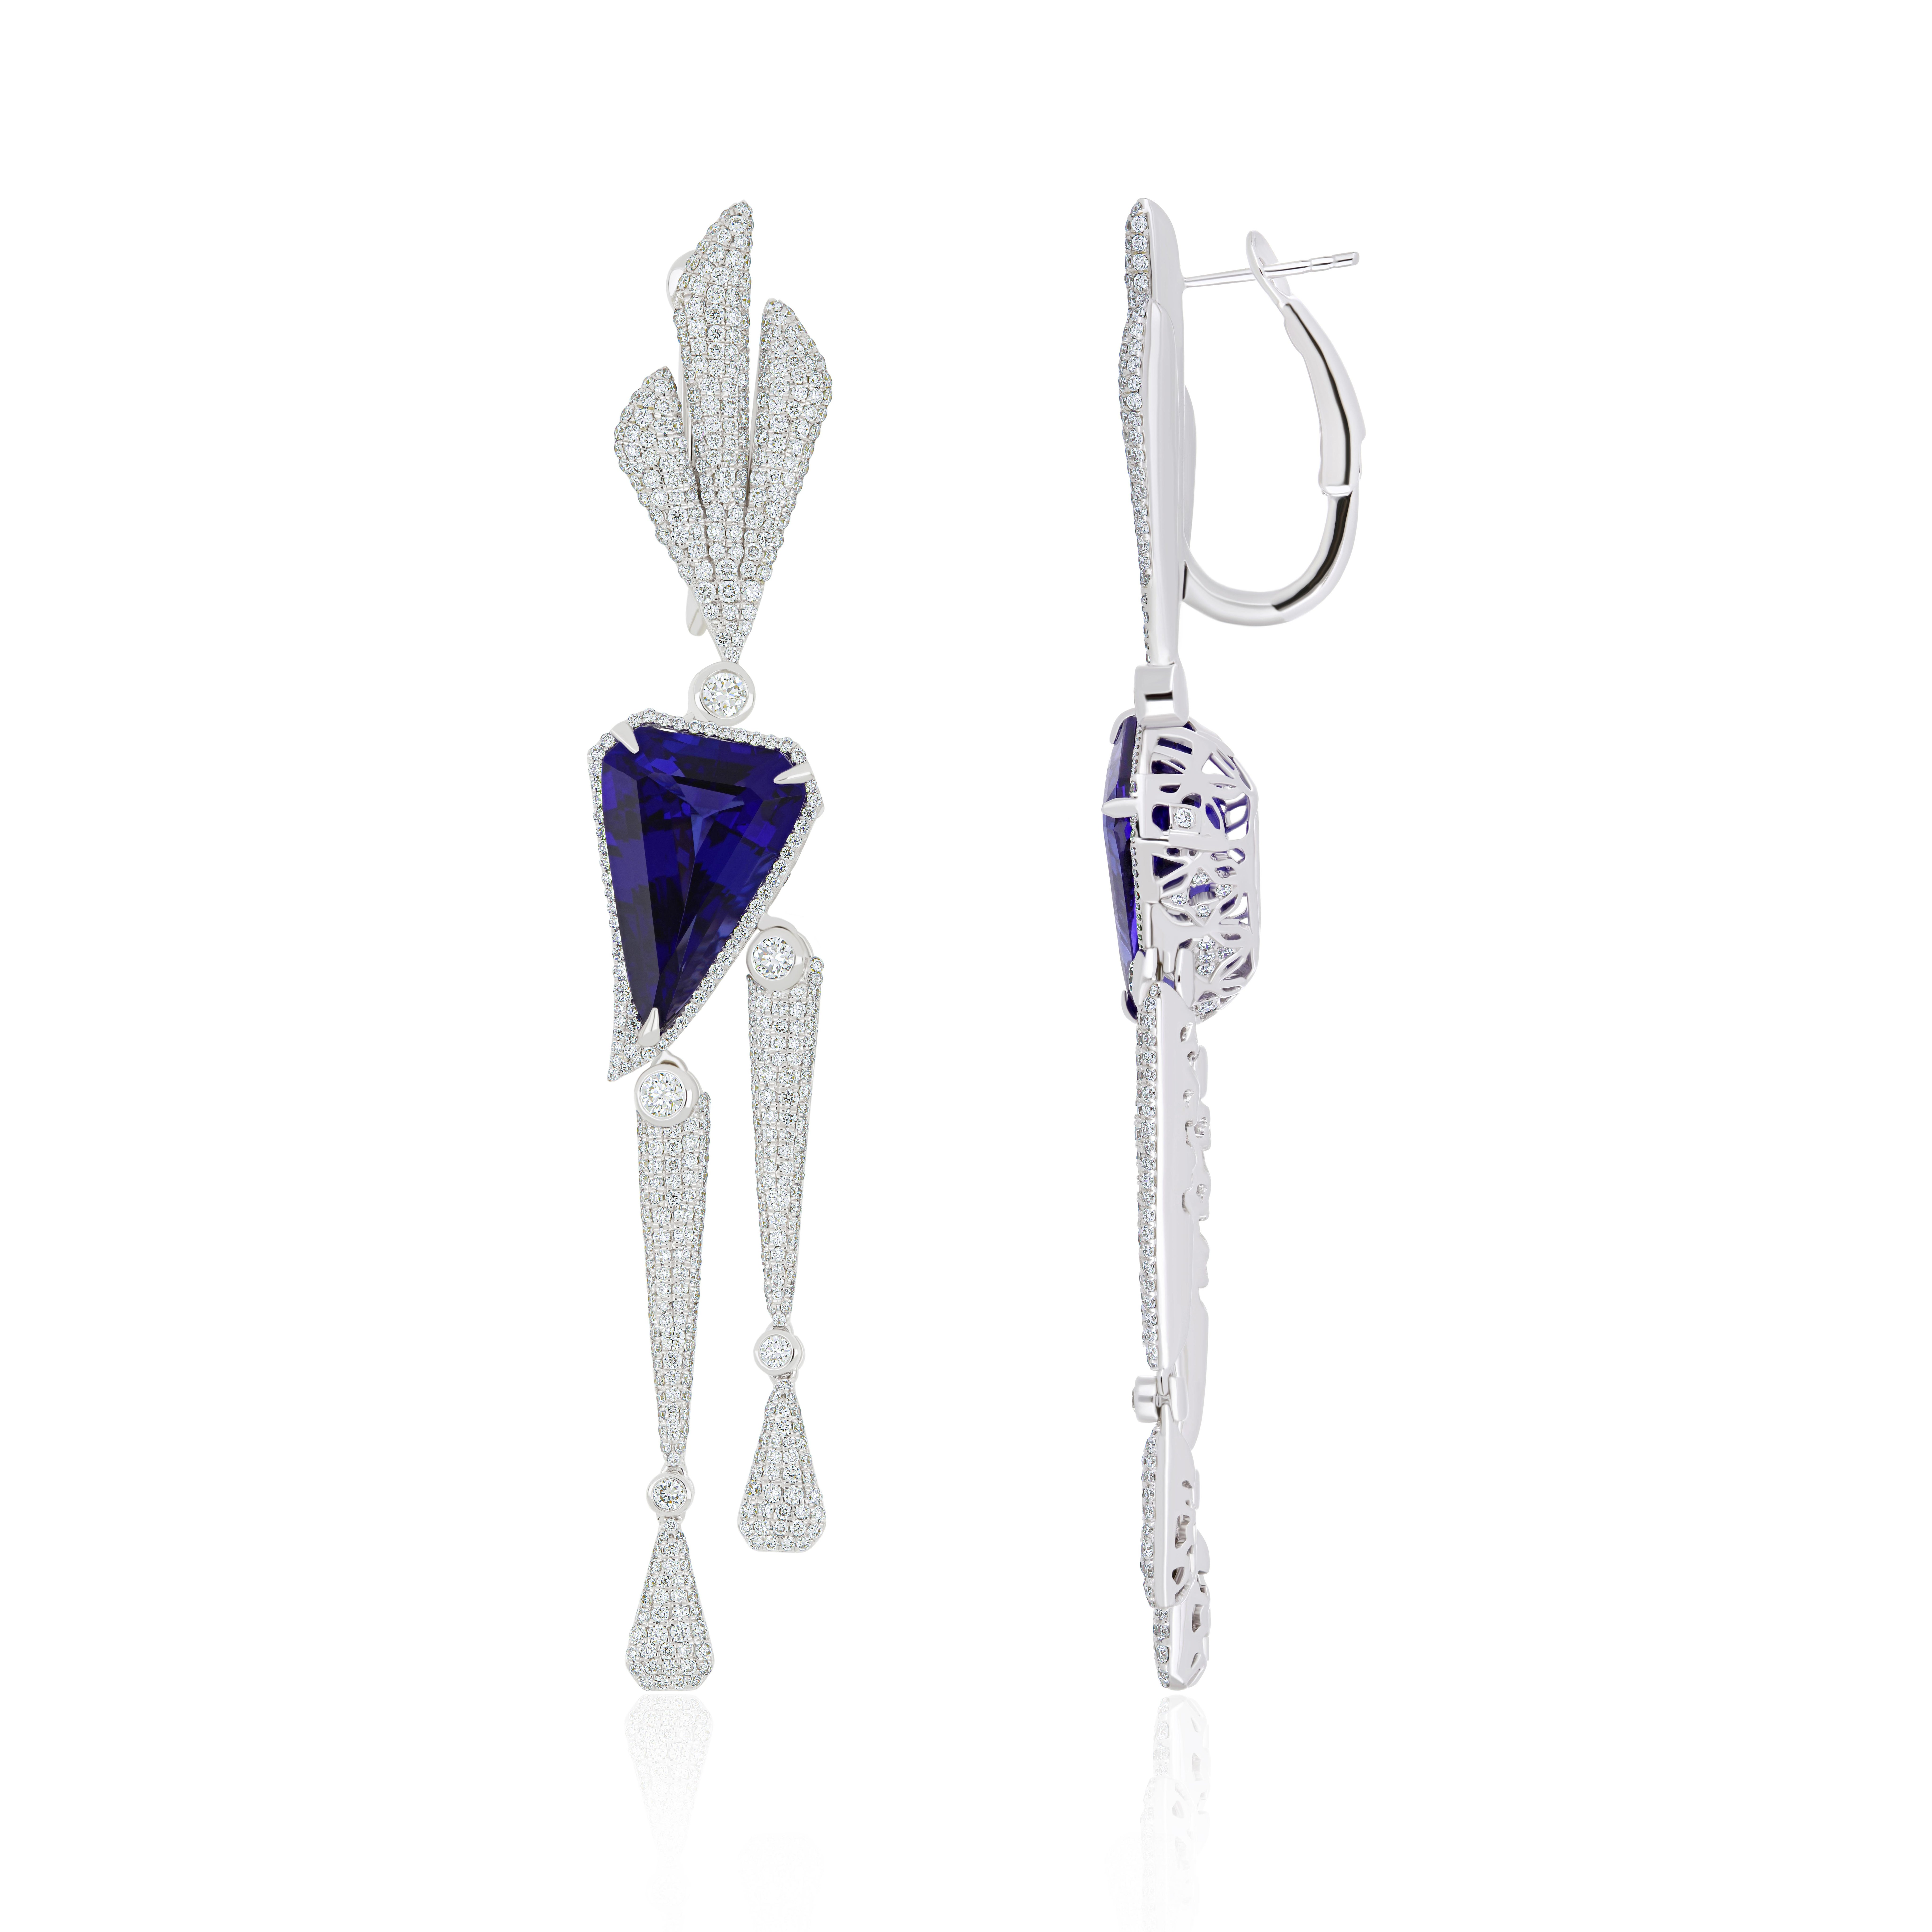 Elegant and Exquisitely detailed White Gold Earring, with 16.3 cts. (approx.) Tanzanite cut in Unique Fancy Shield Shape accented with micro pave Diamonds, weighing approx. 5.1 cuts. (approx.). total carat weight. Beautifully Hand-Crafted Earring in